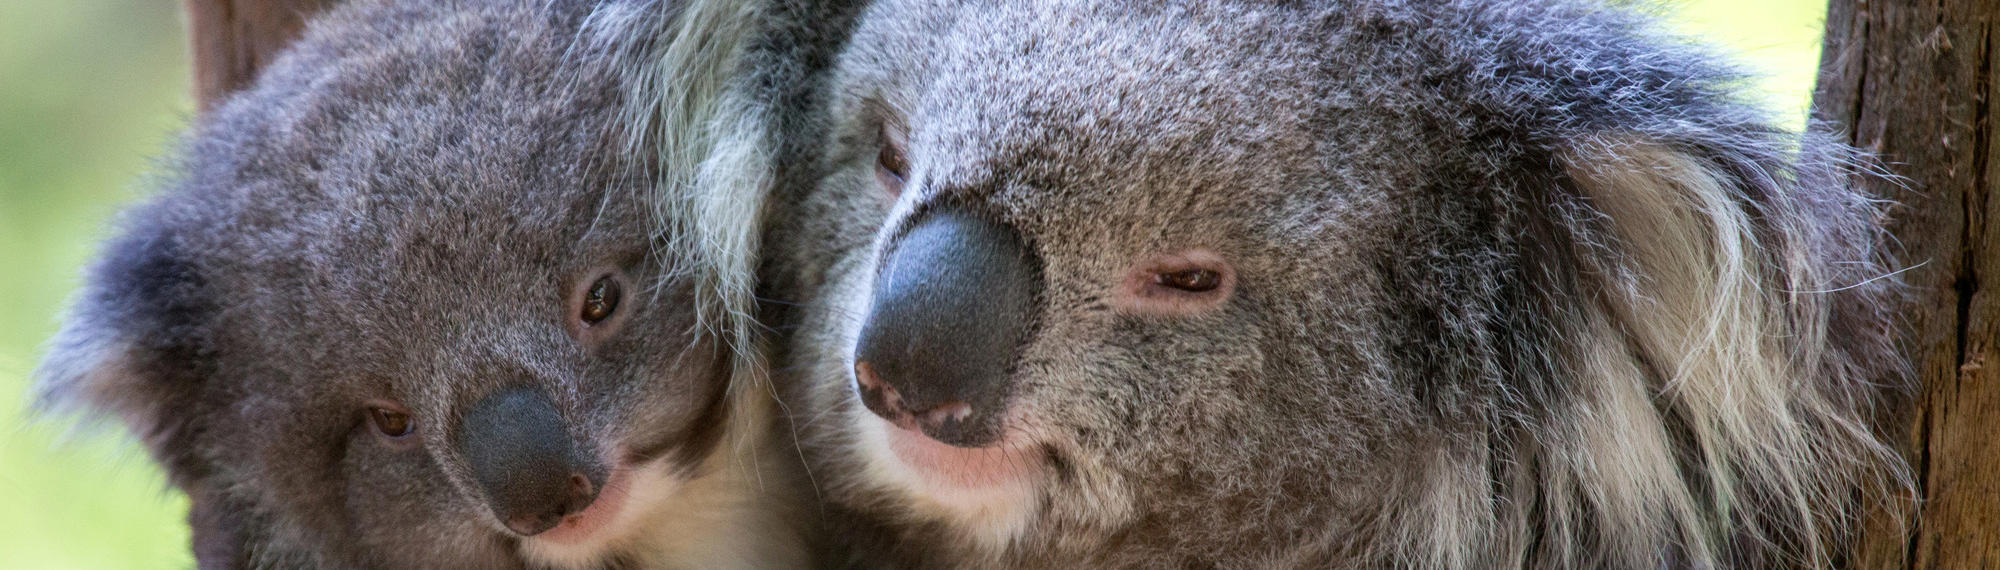 Close up of two koalas cuddling each other